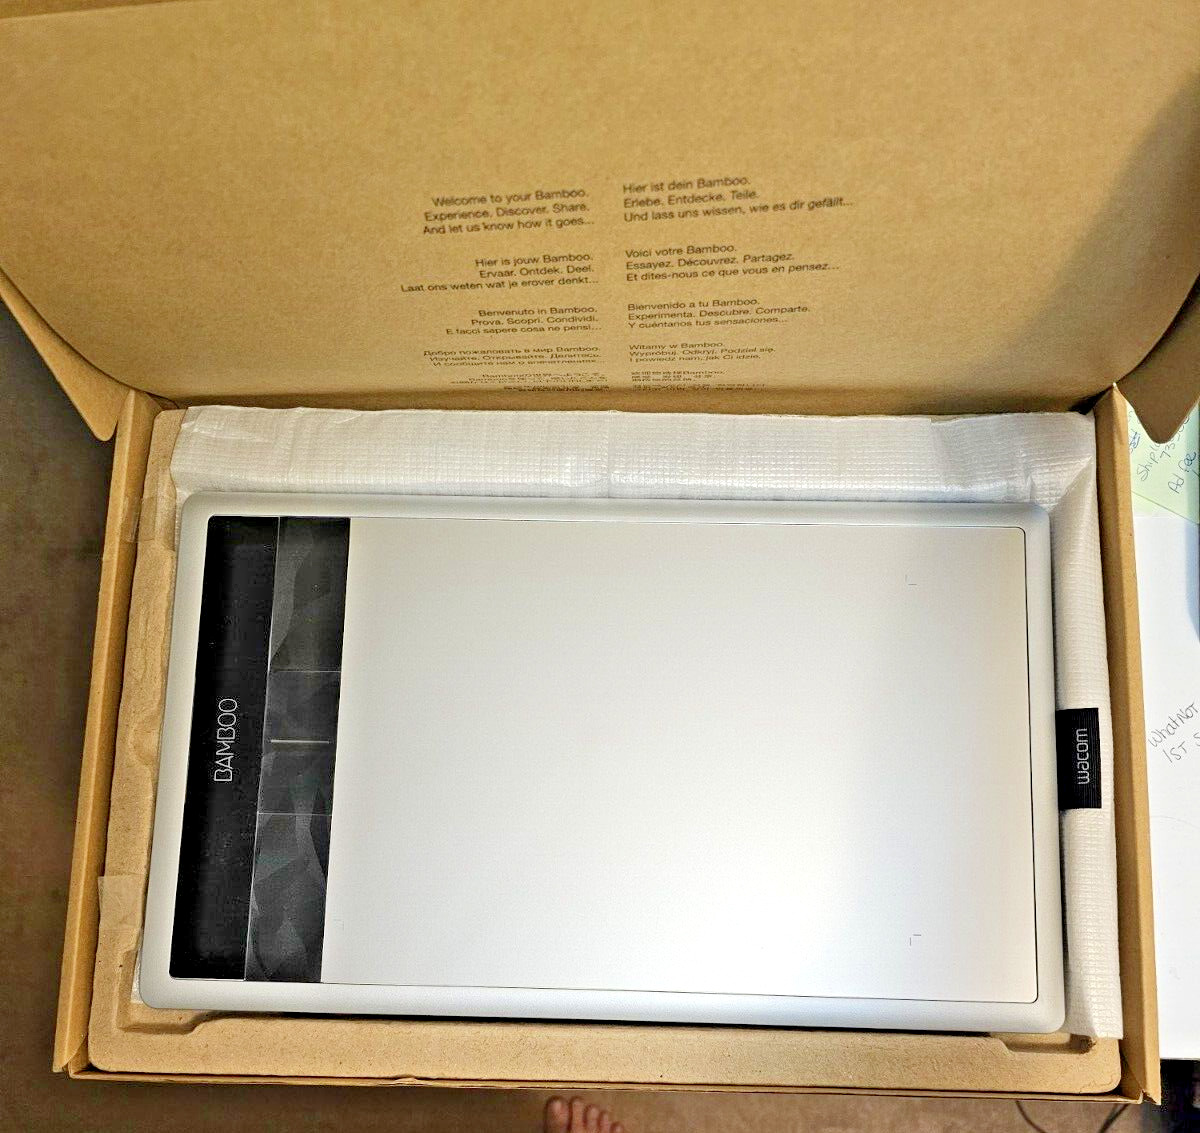 Wacom Bamboo Create Pen and Touch Tablet CTH670 Graphics Drawing Board